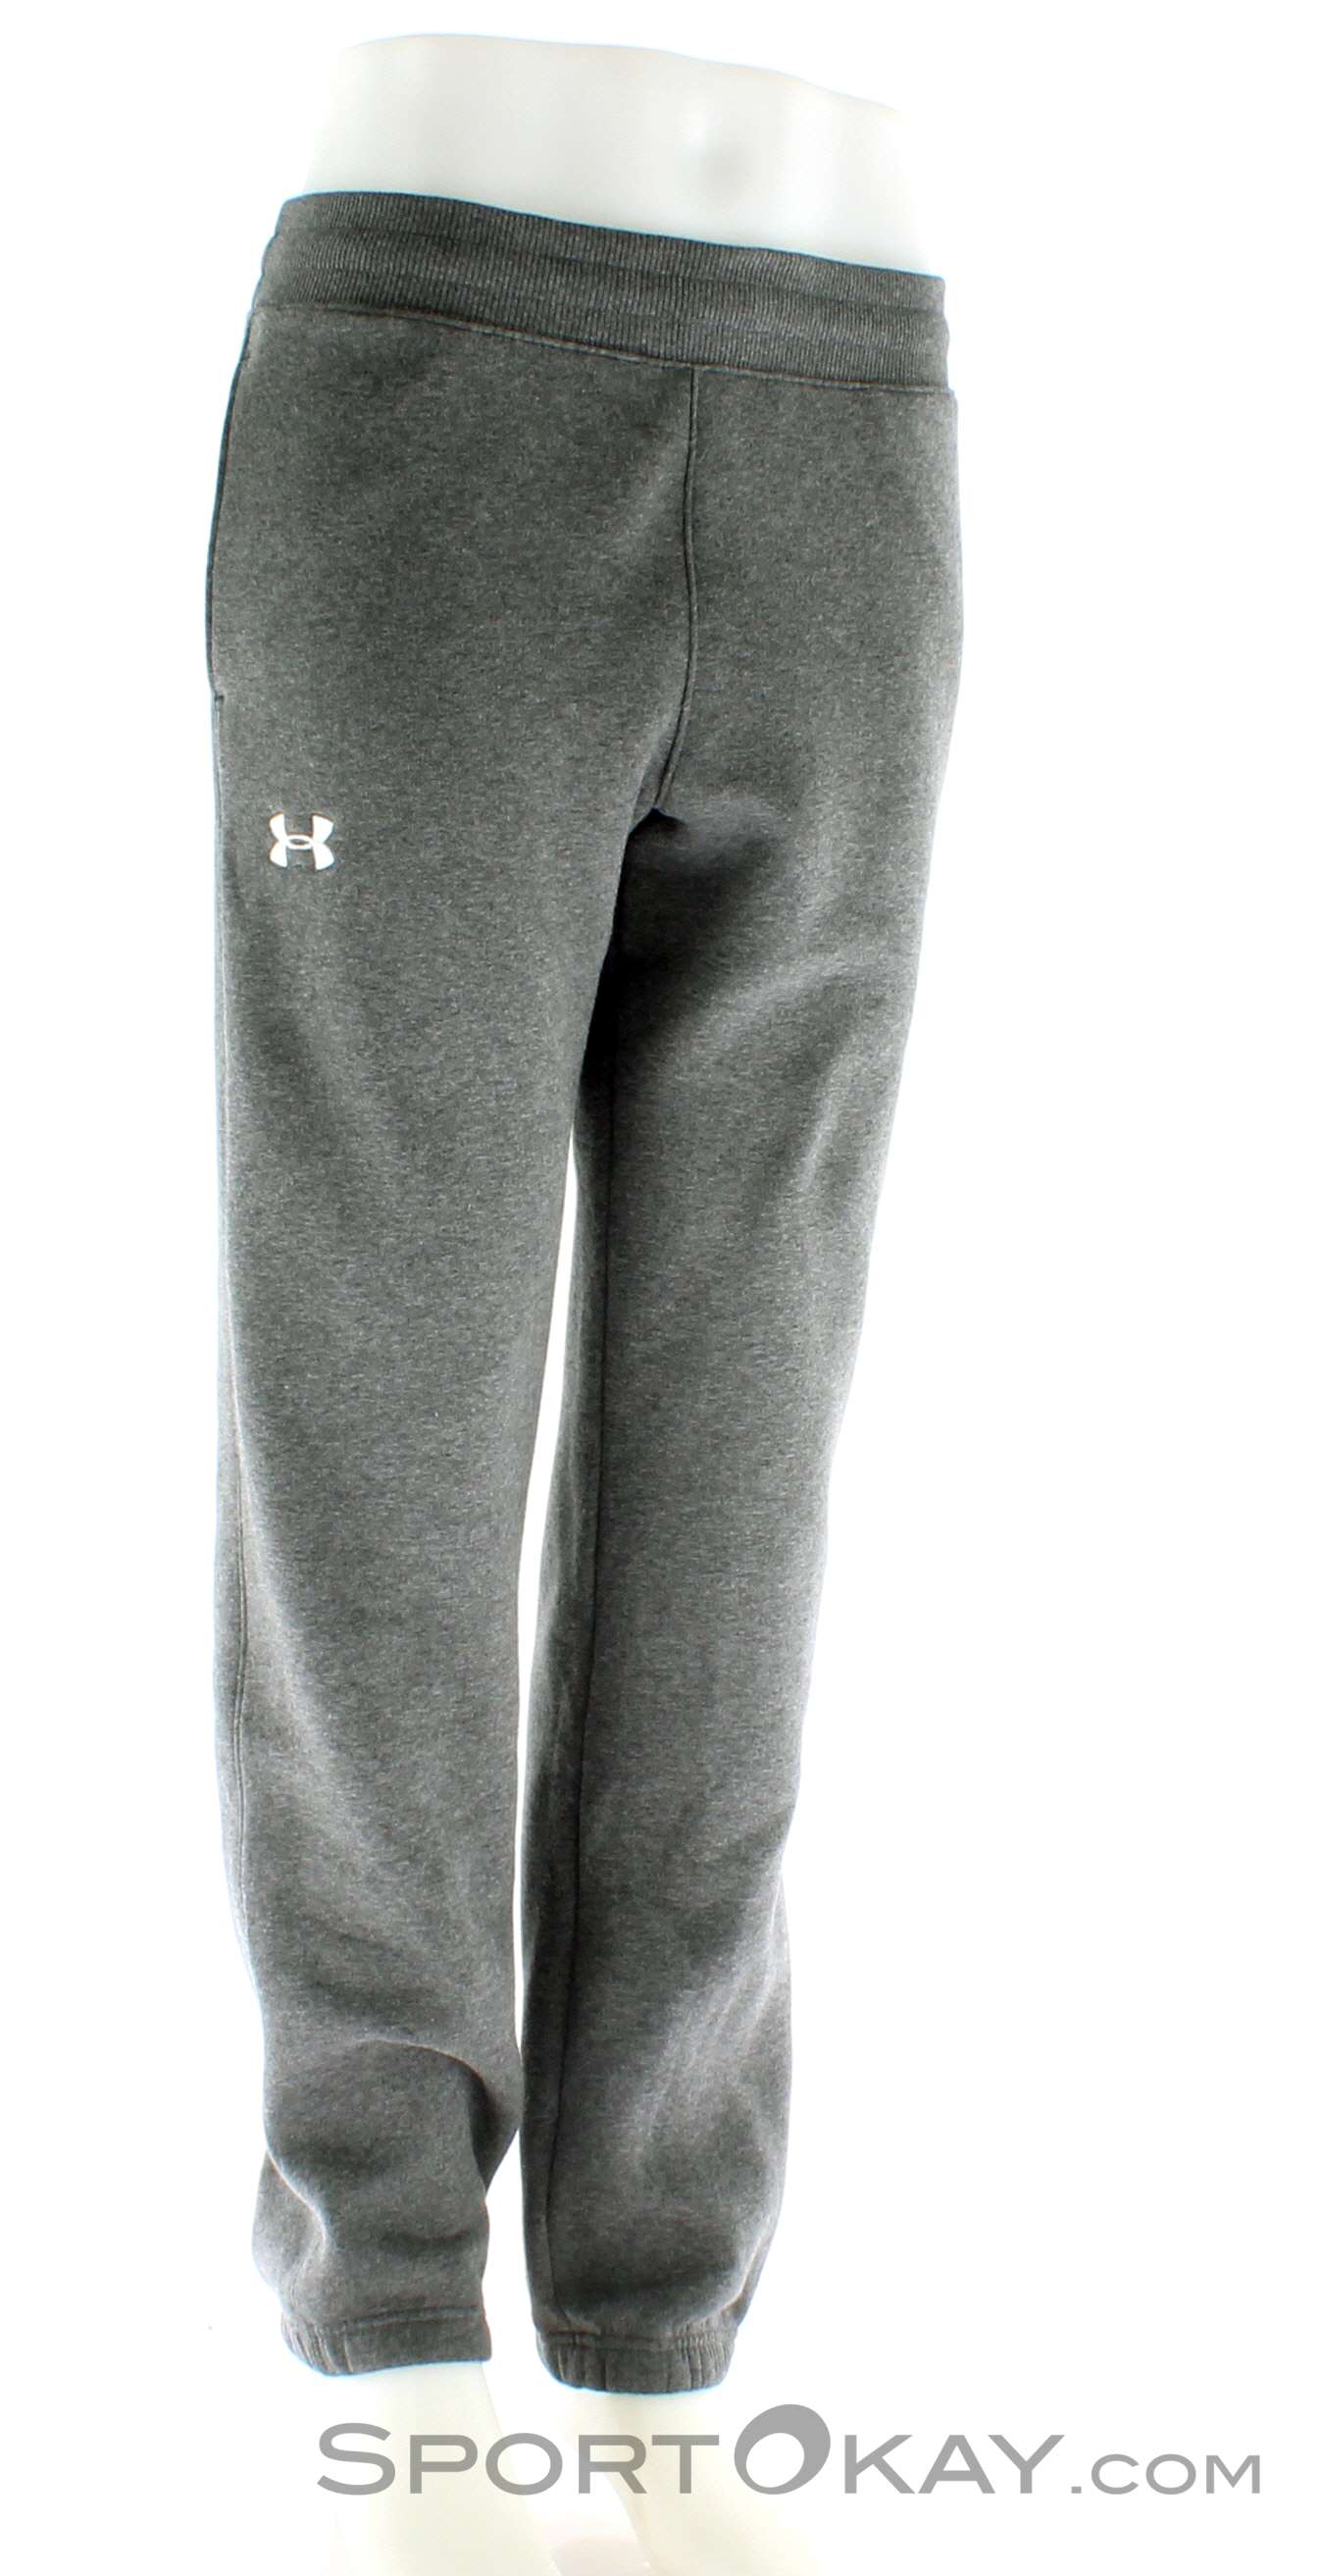 Under Armour Storm Cotton Pant Fitness Pants - - Clothing Cuffed Fitness All Herren - Trainingshose 